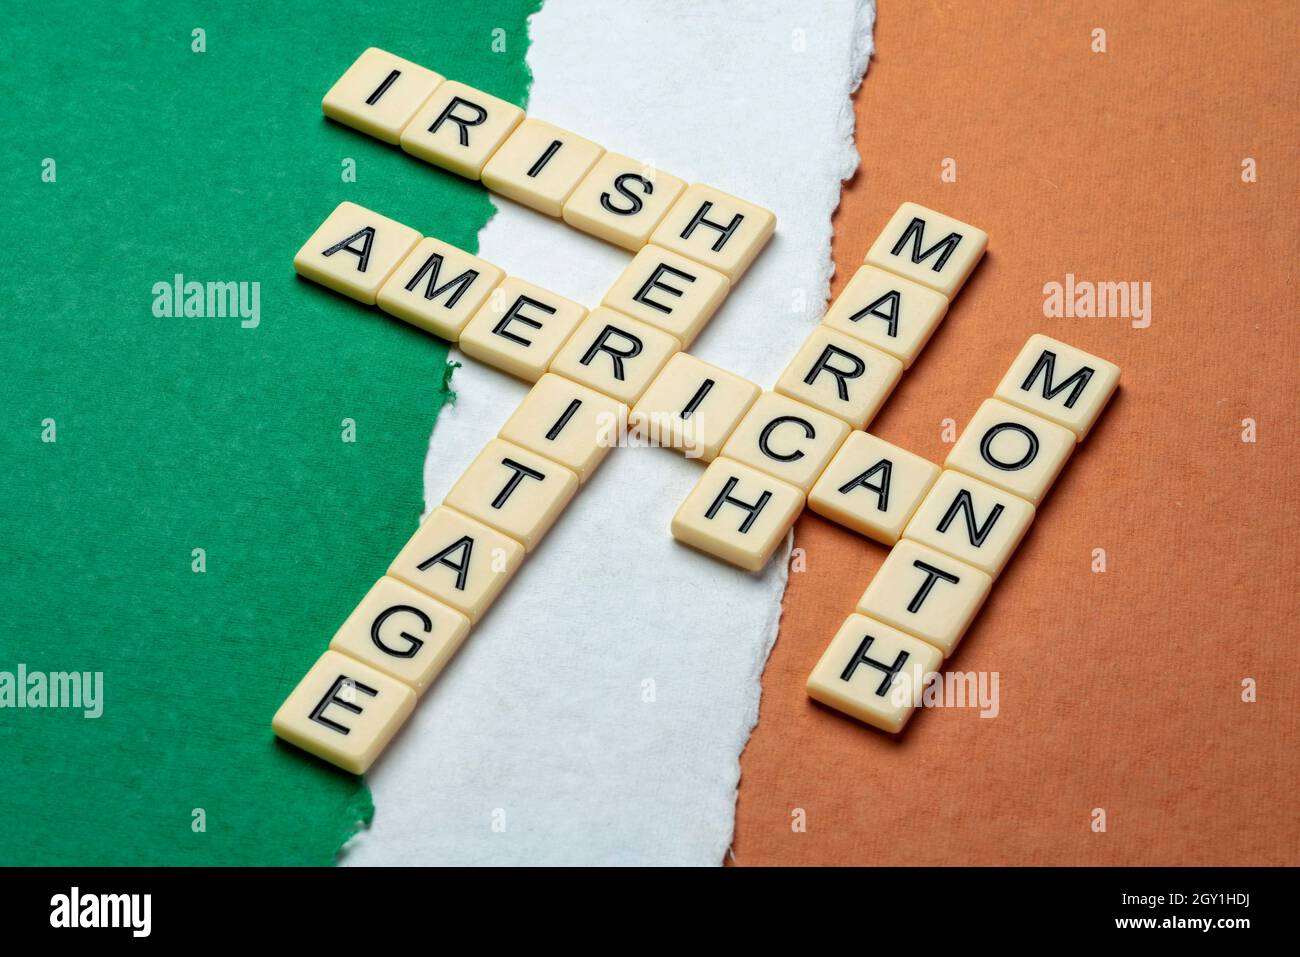 March - National Irish American Heritage Month, crossword on a paper abstract in colors of national flag of Ireland (green, white and orange), reminde Stock Photo